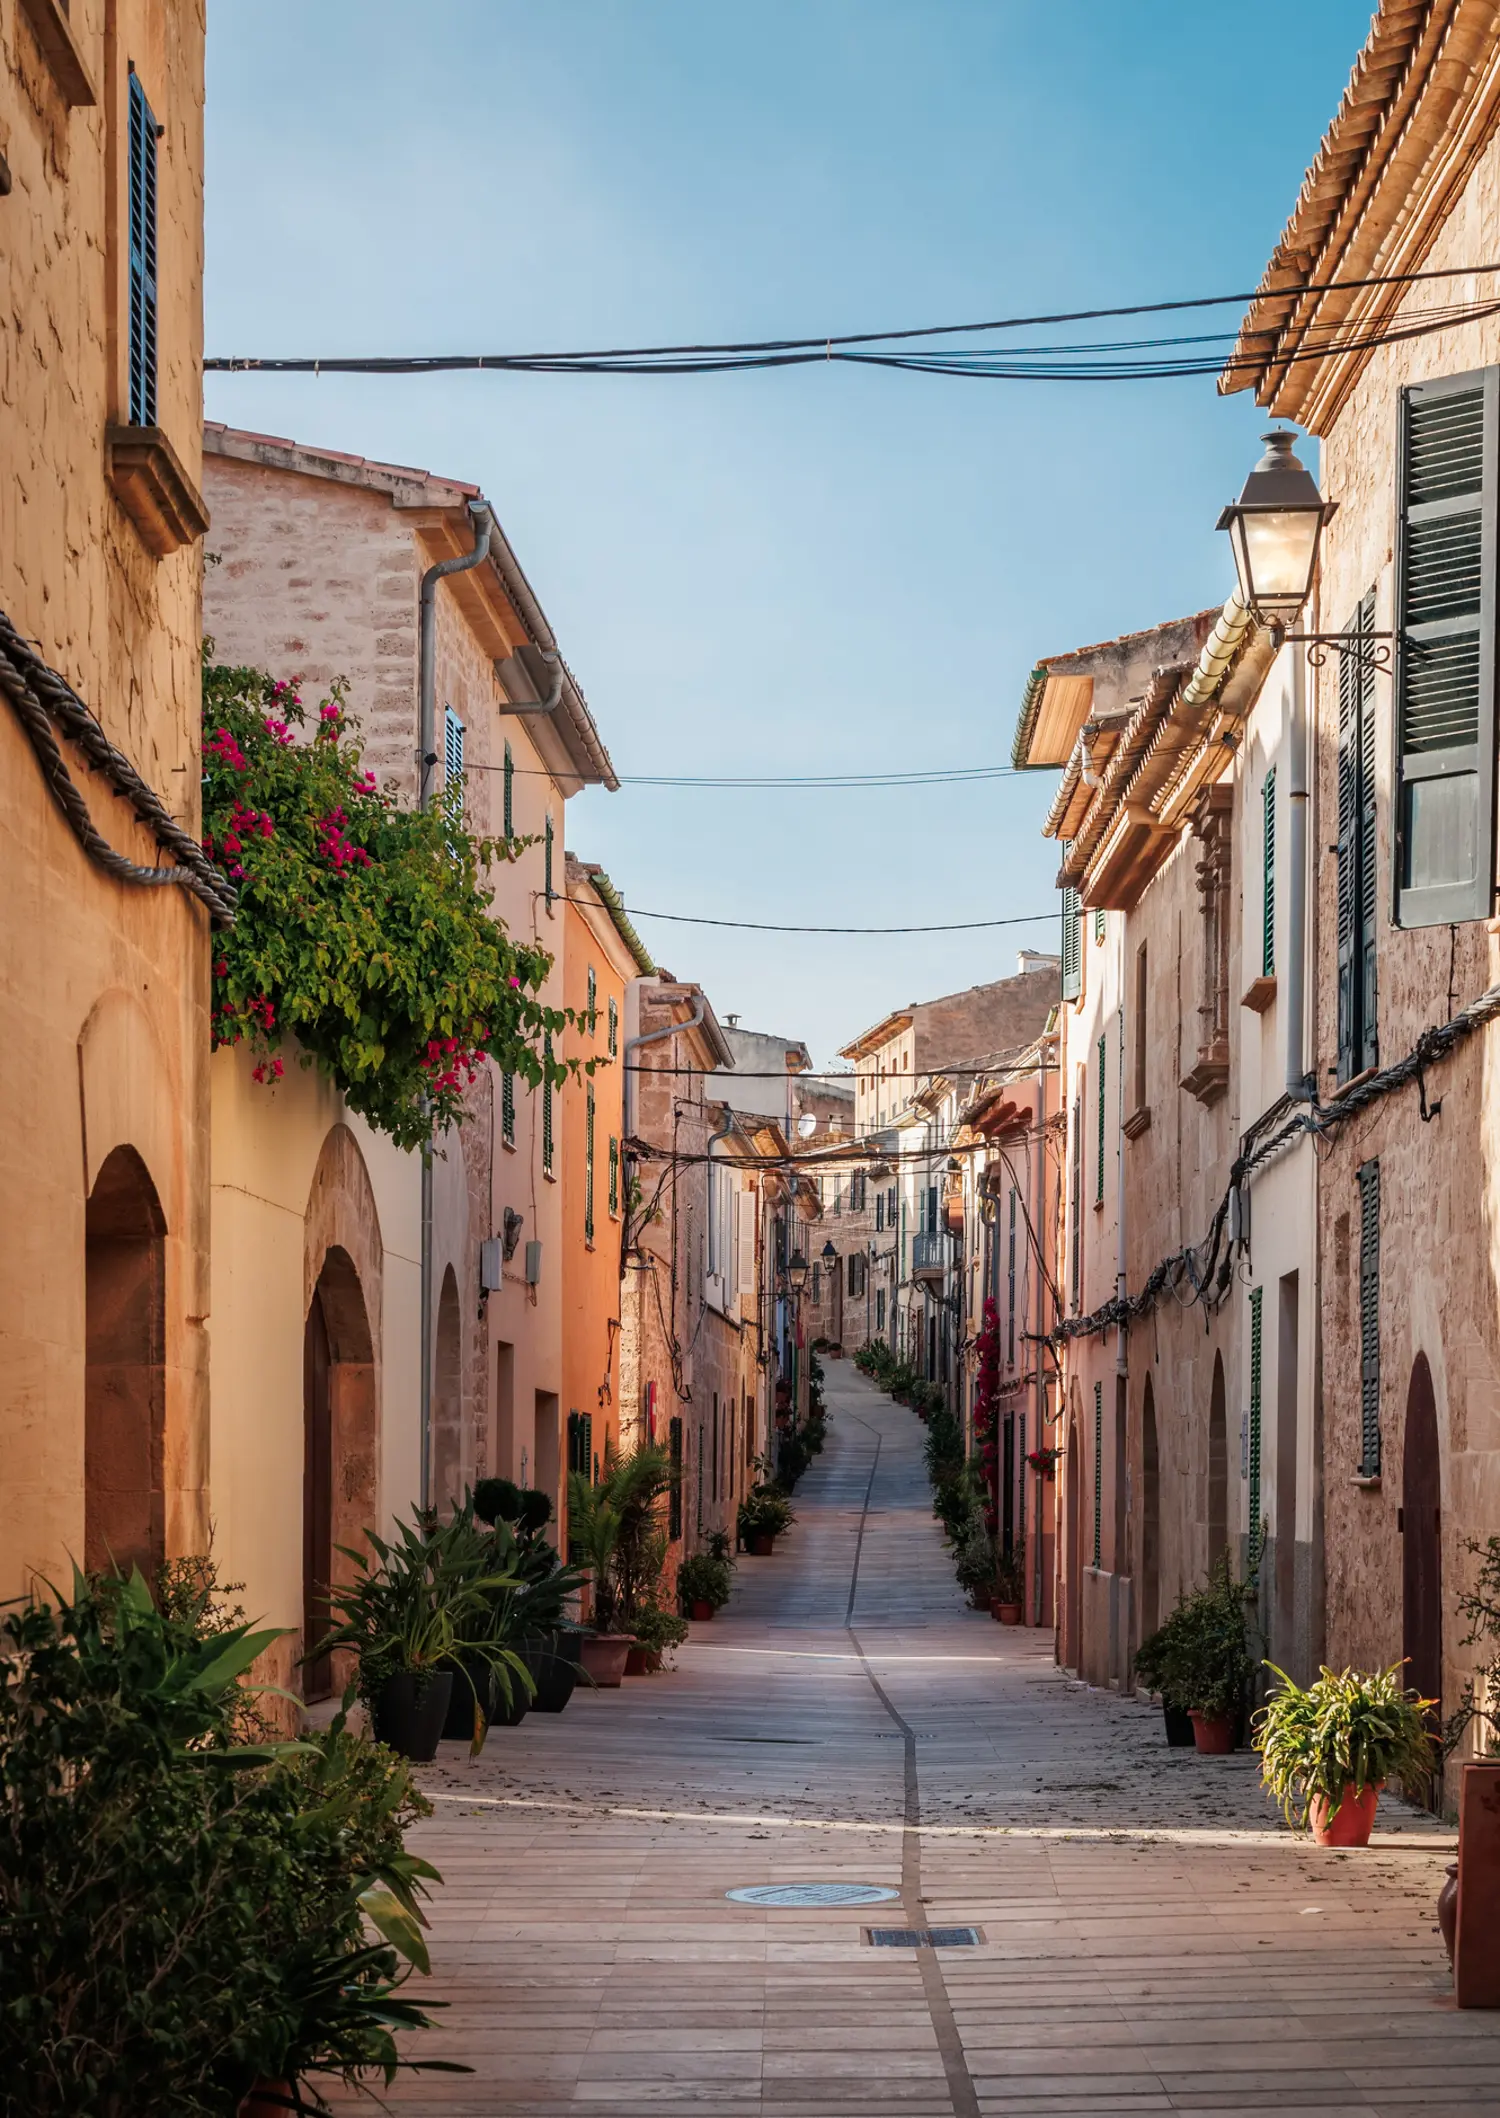 Narrow tiled street with beige and yellow stone houses on both sides with flower pots in Alcudia Mallorca.